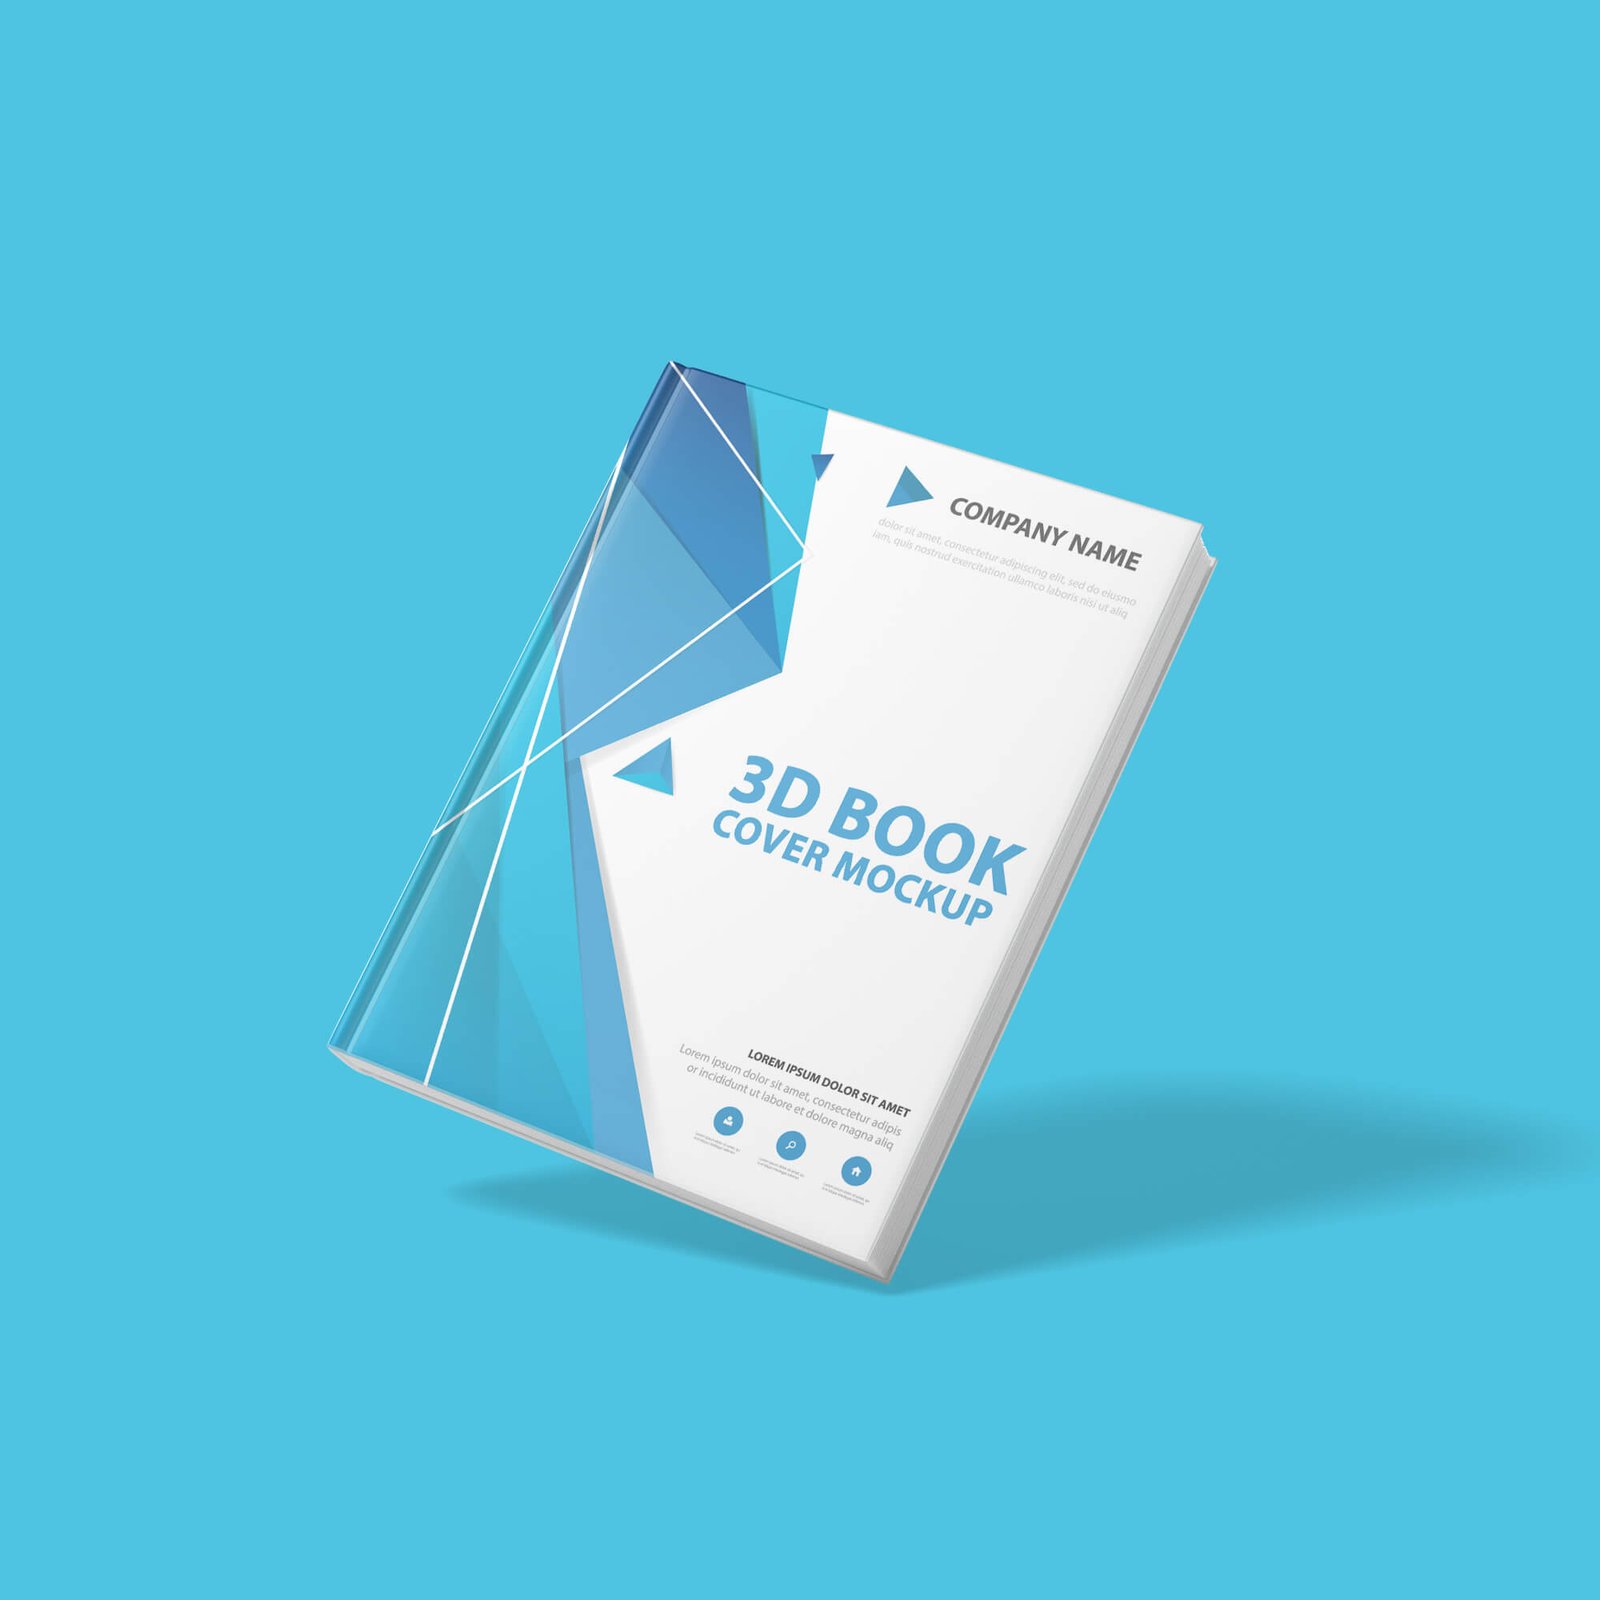 Design Free 3D Book Cover Mockup PSD Template